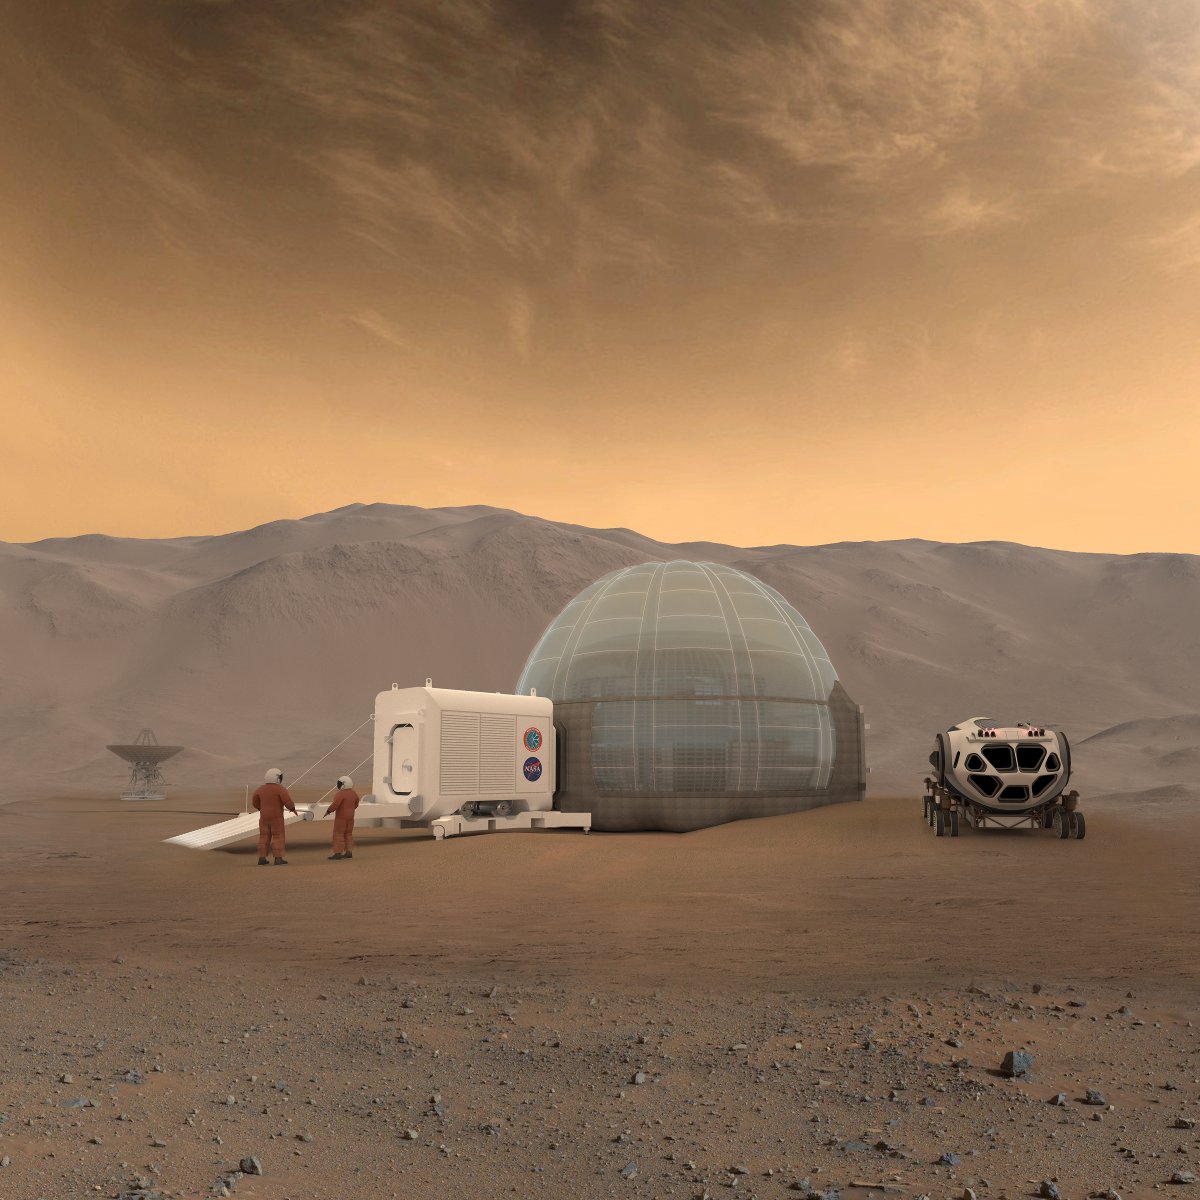 An artist's conception of a Mars habitat, with an Ice-house, air-lock, and pressurized rover designs on Mars | Author: NASA/Clouds AO/SEArch | License: CC0